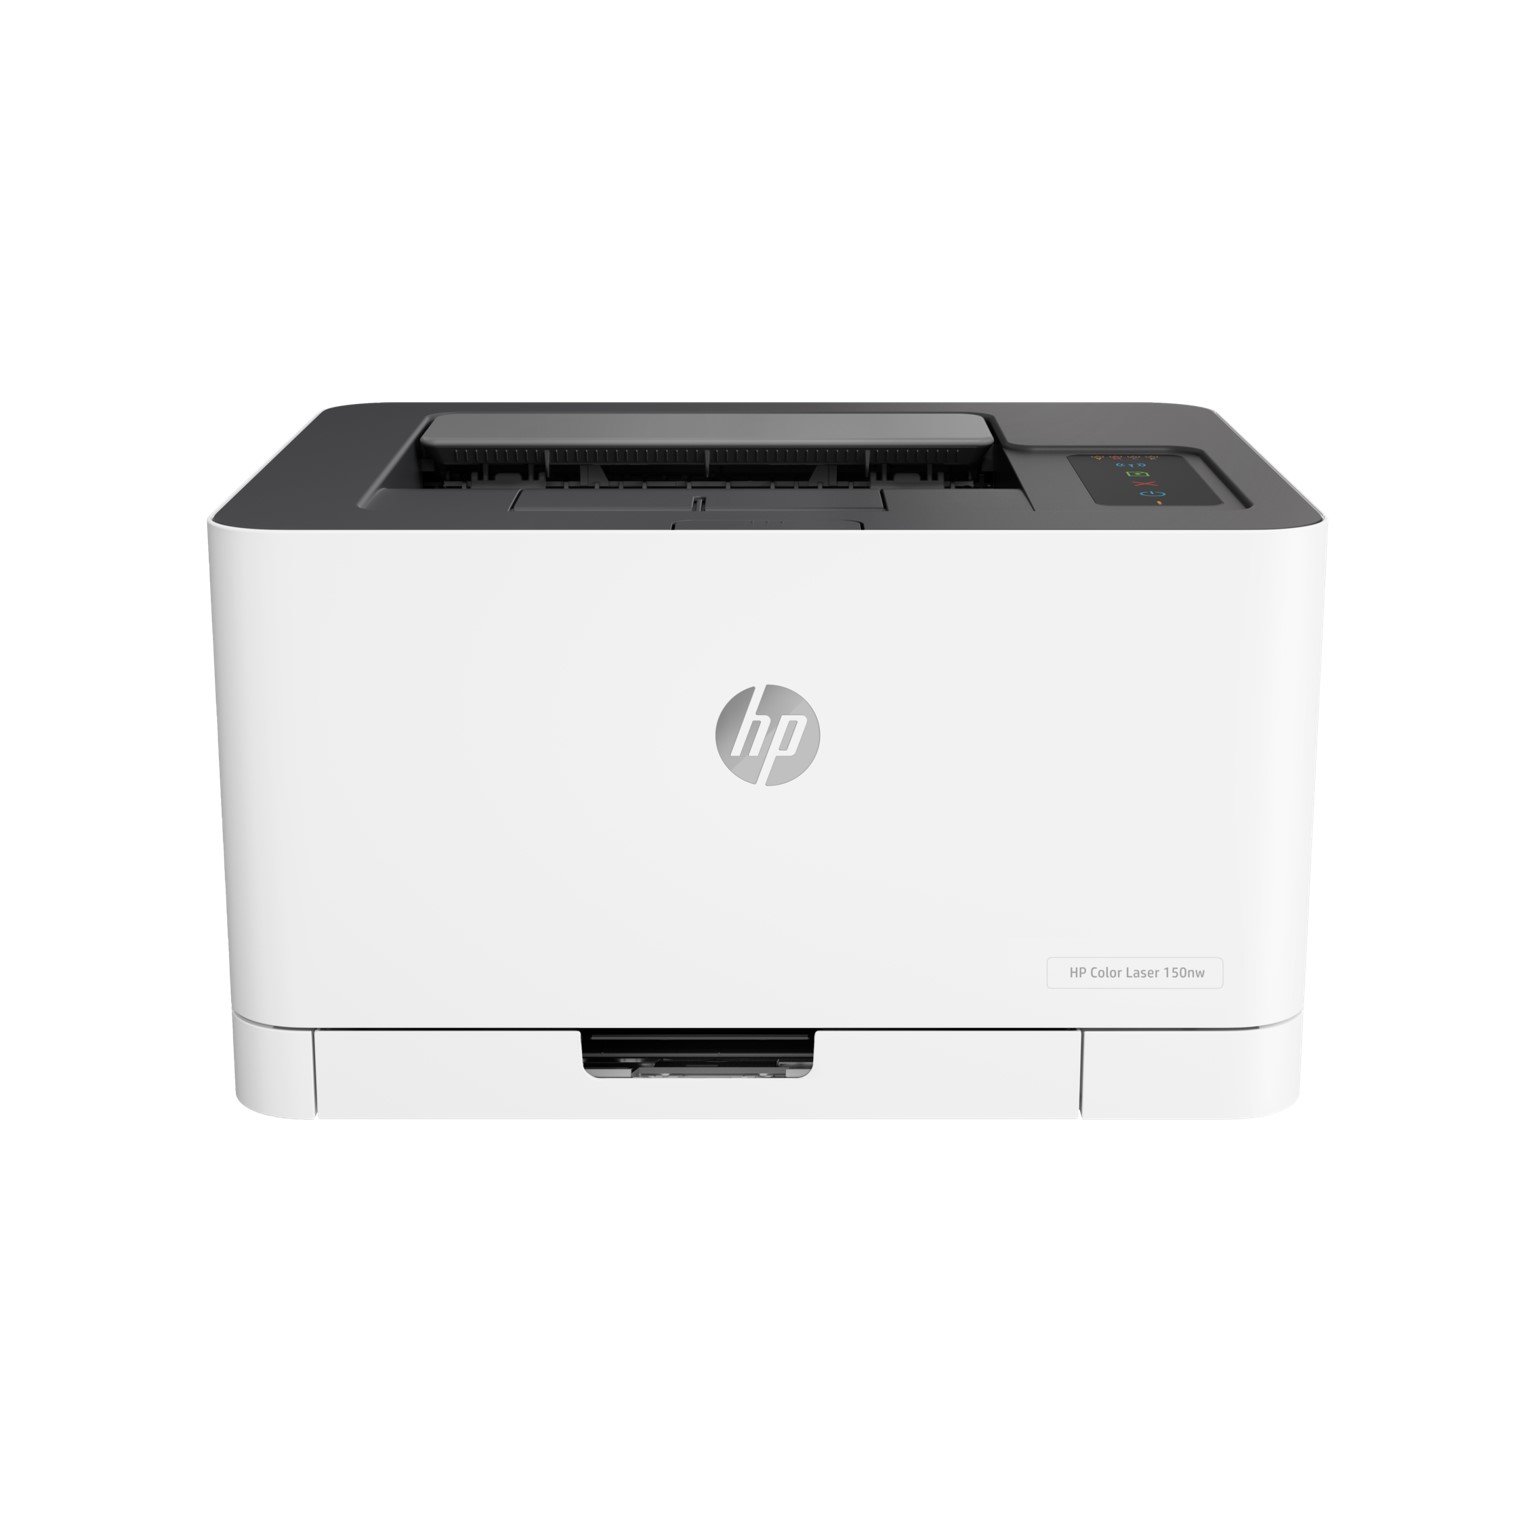 HP 150nw Color Laser